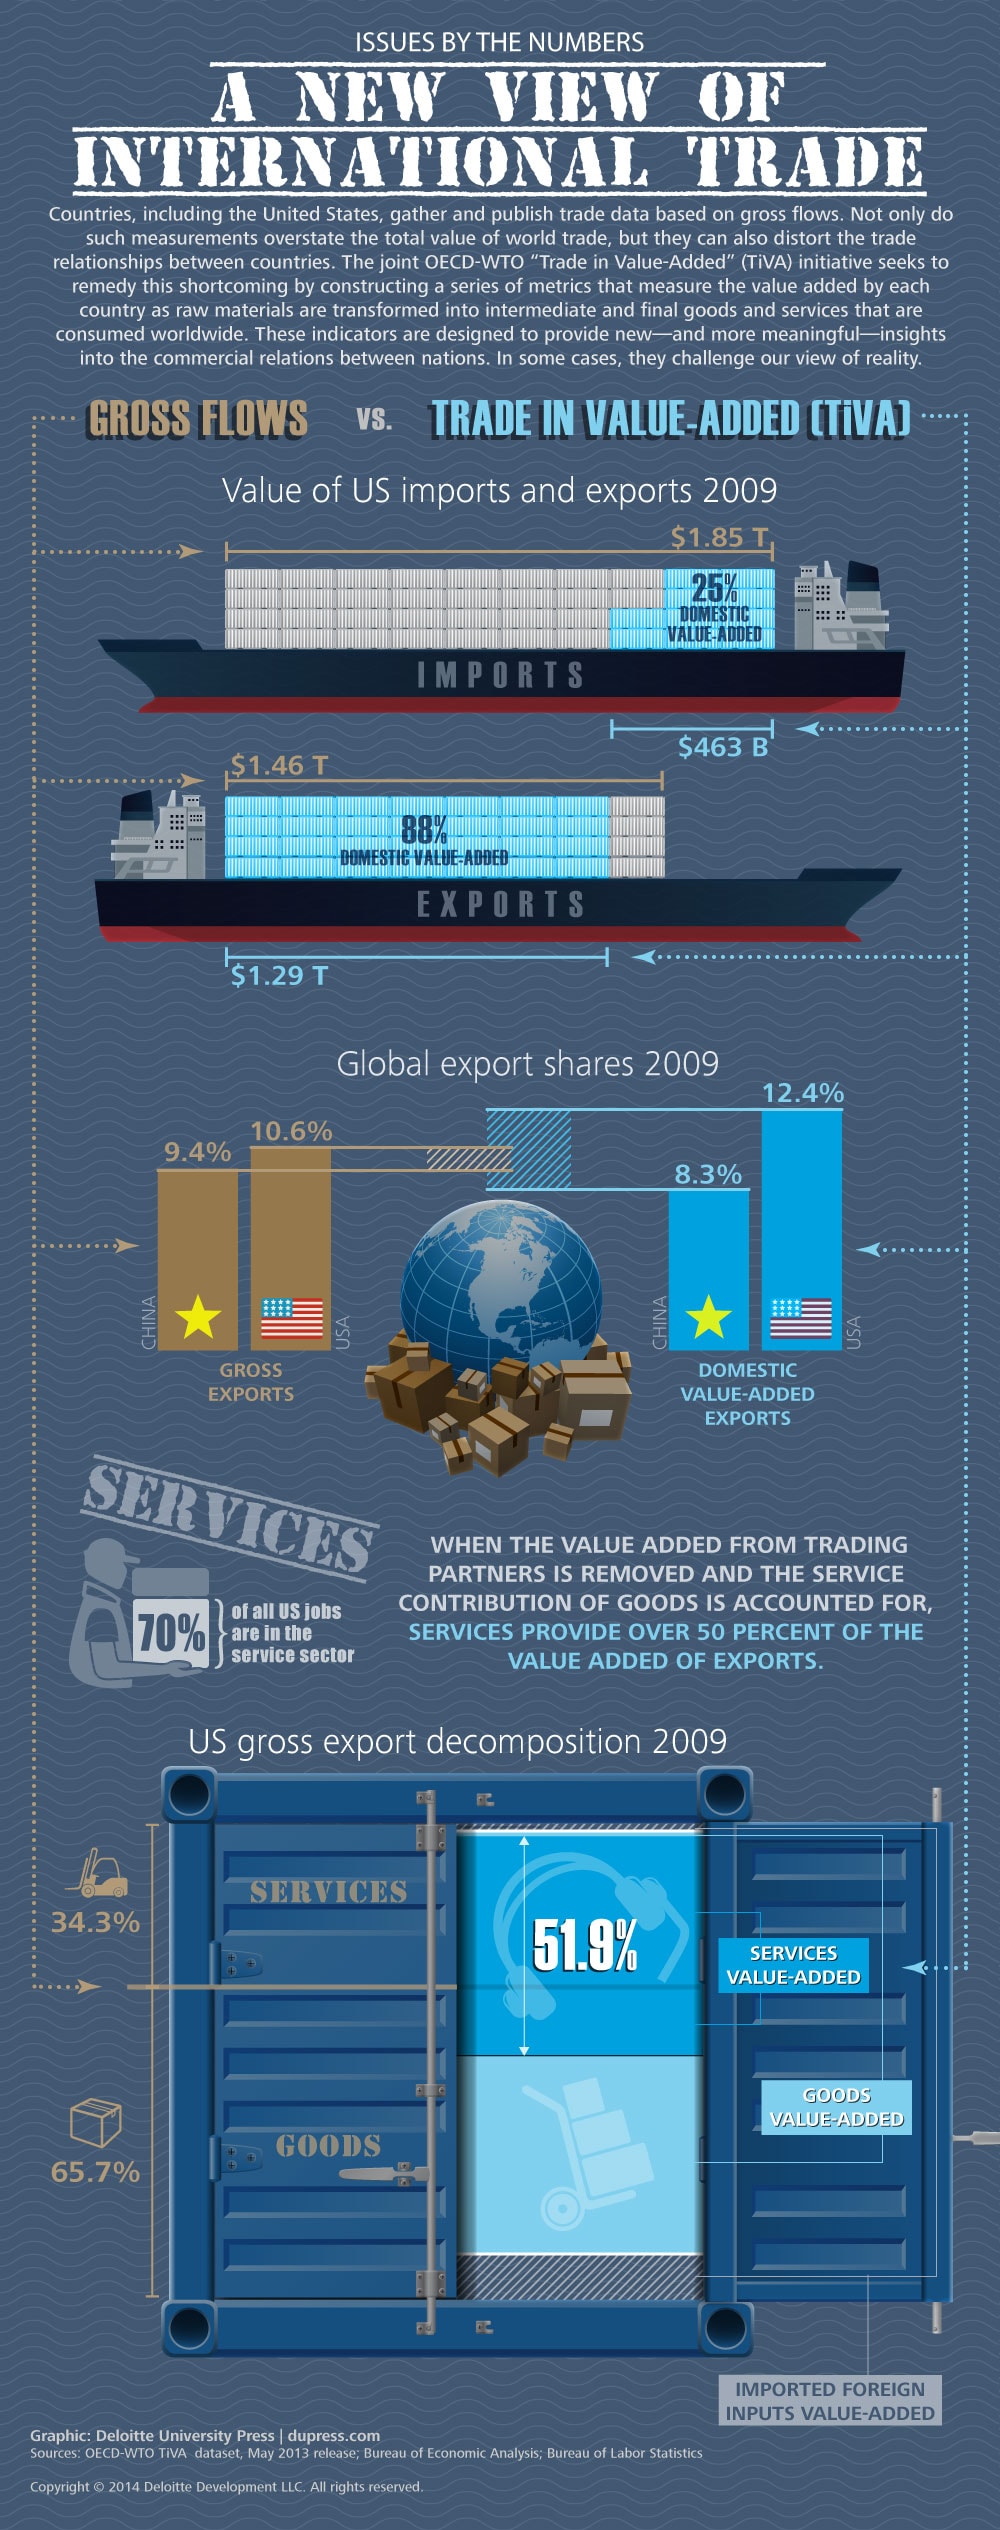 A new view of international trade